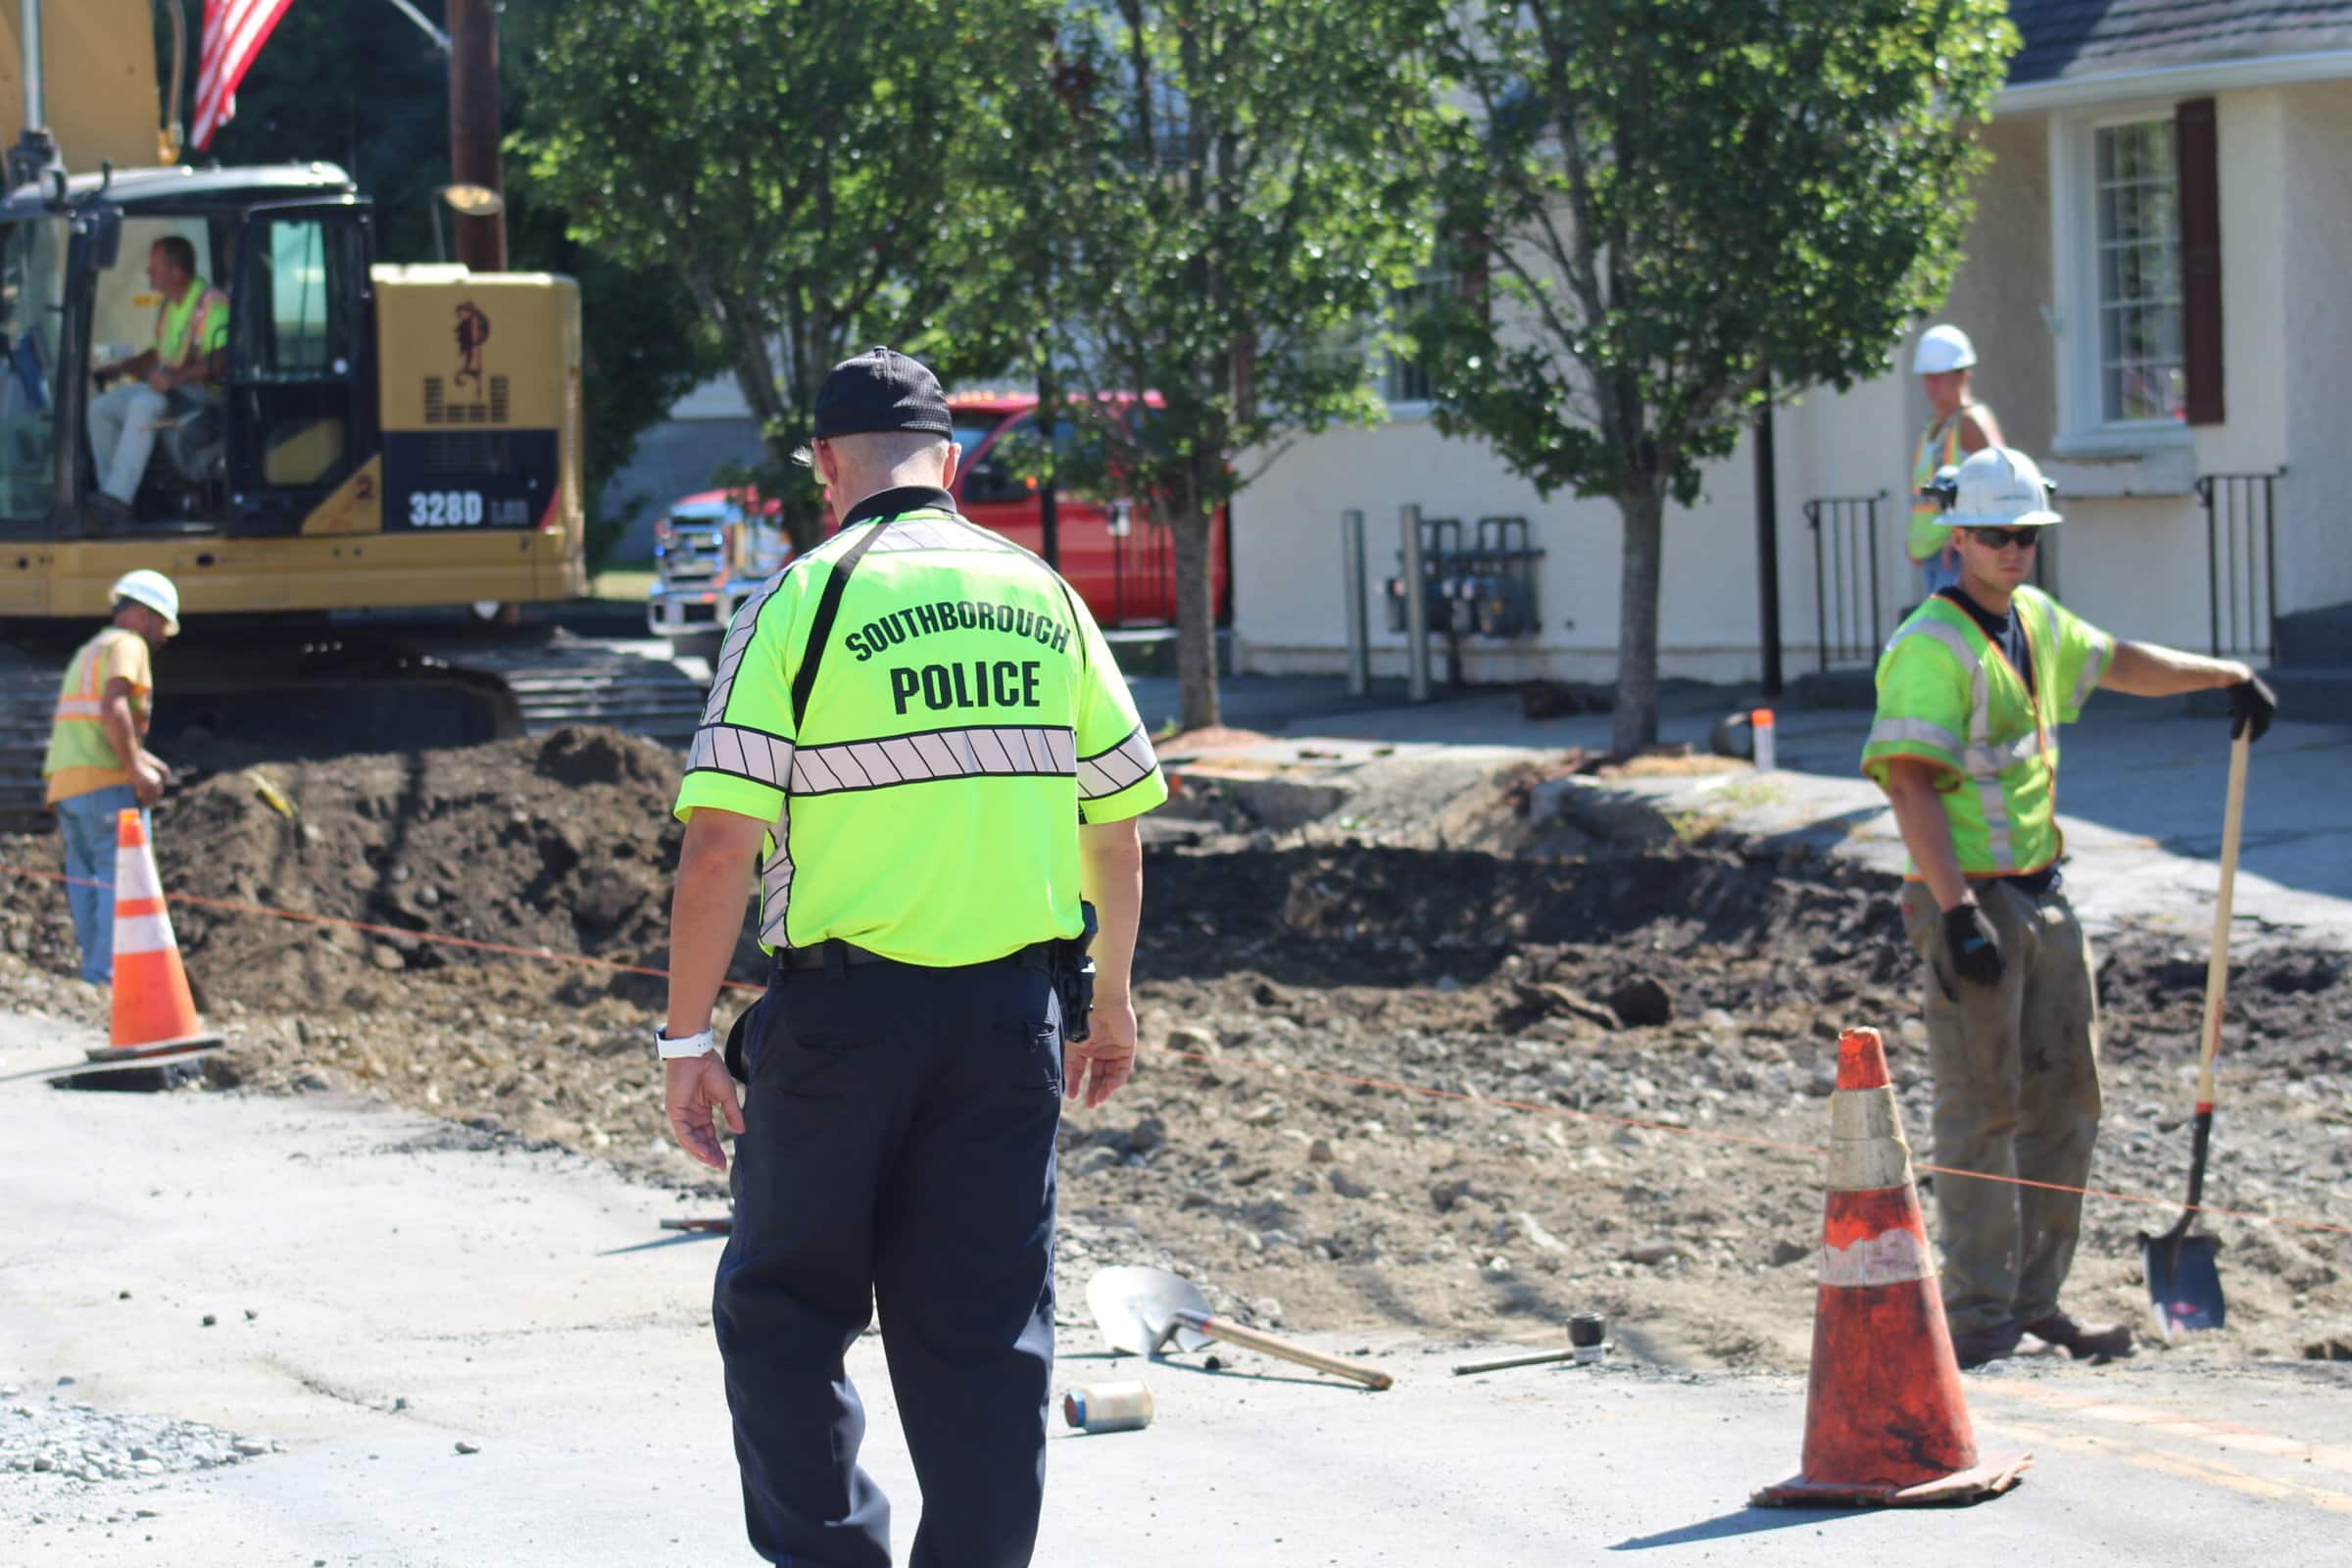 Excavator strikes natural gas line in Southborough